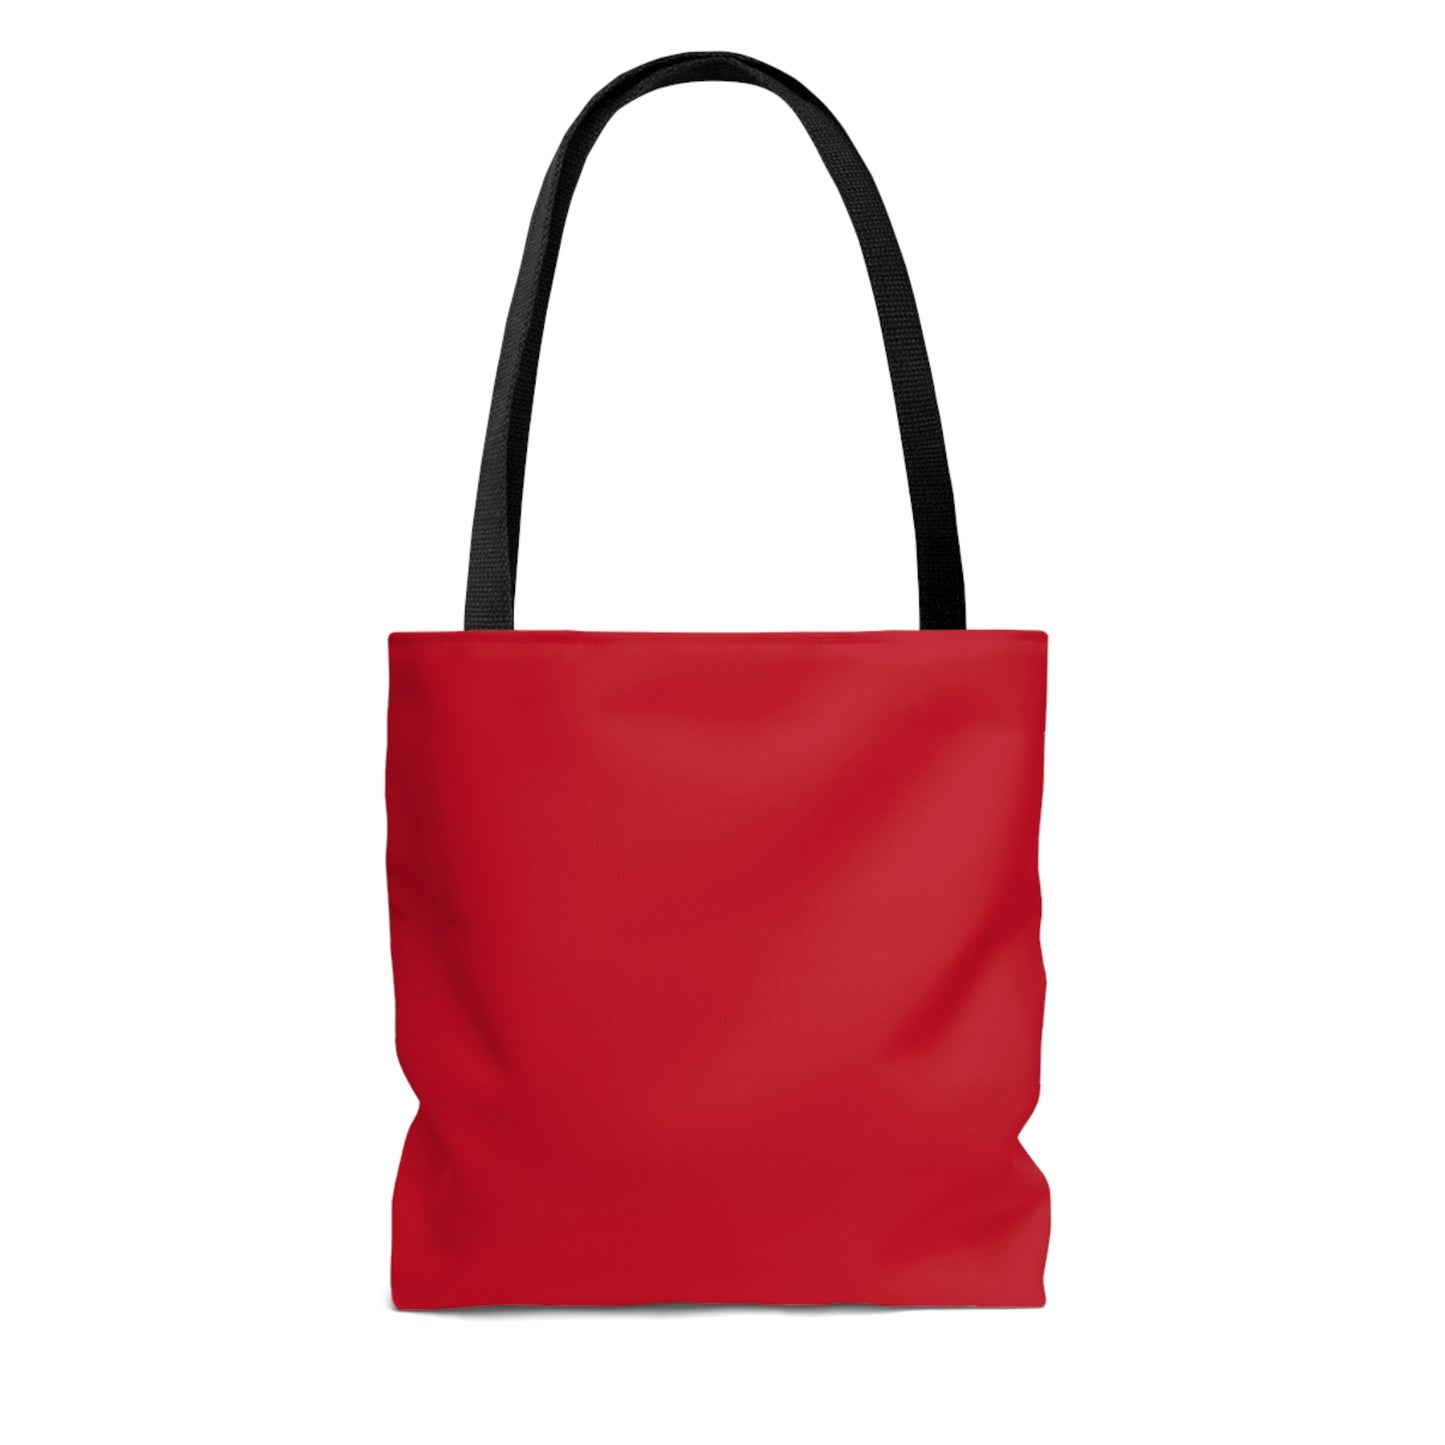 Red Baby's Breath Goddess Tote Bag